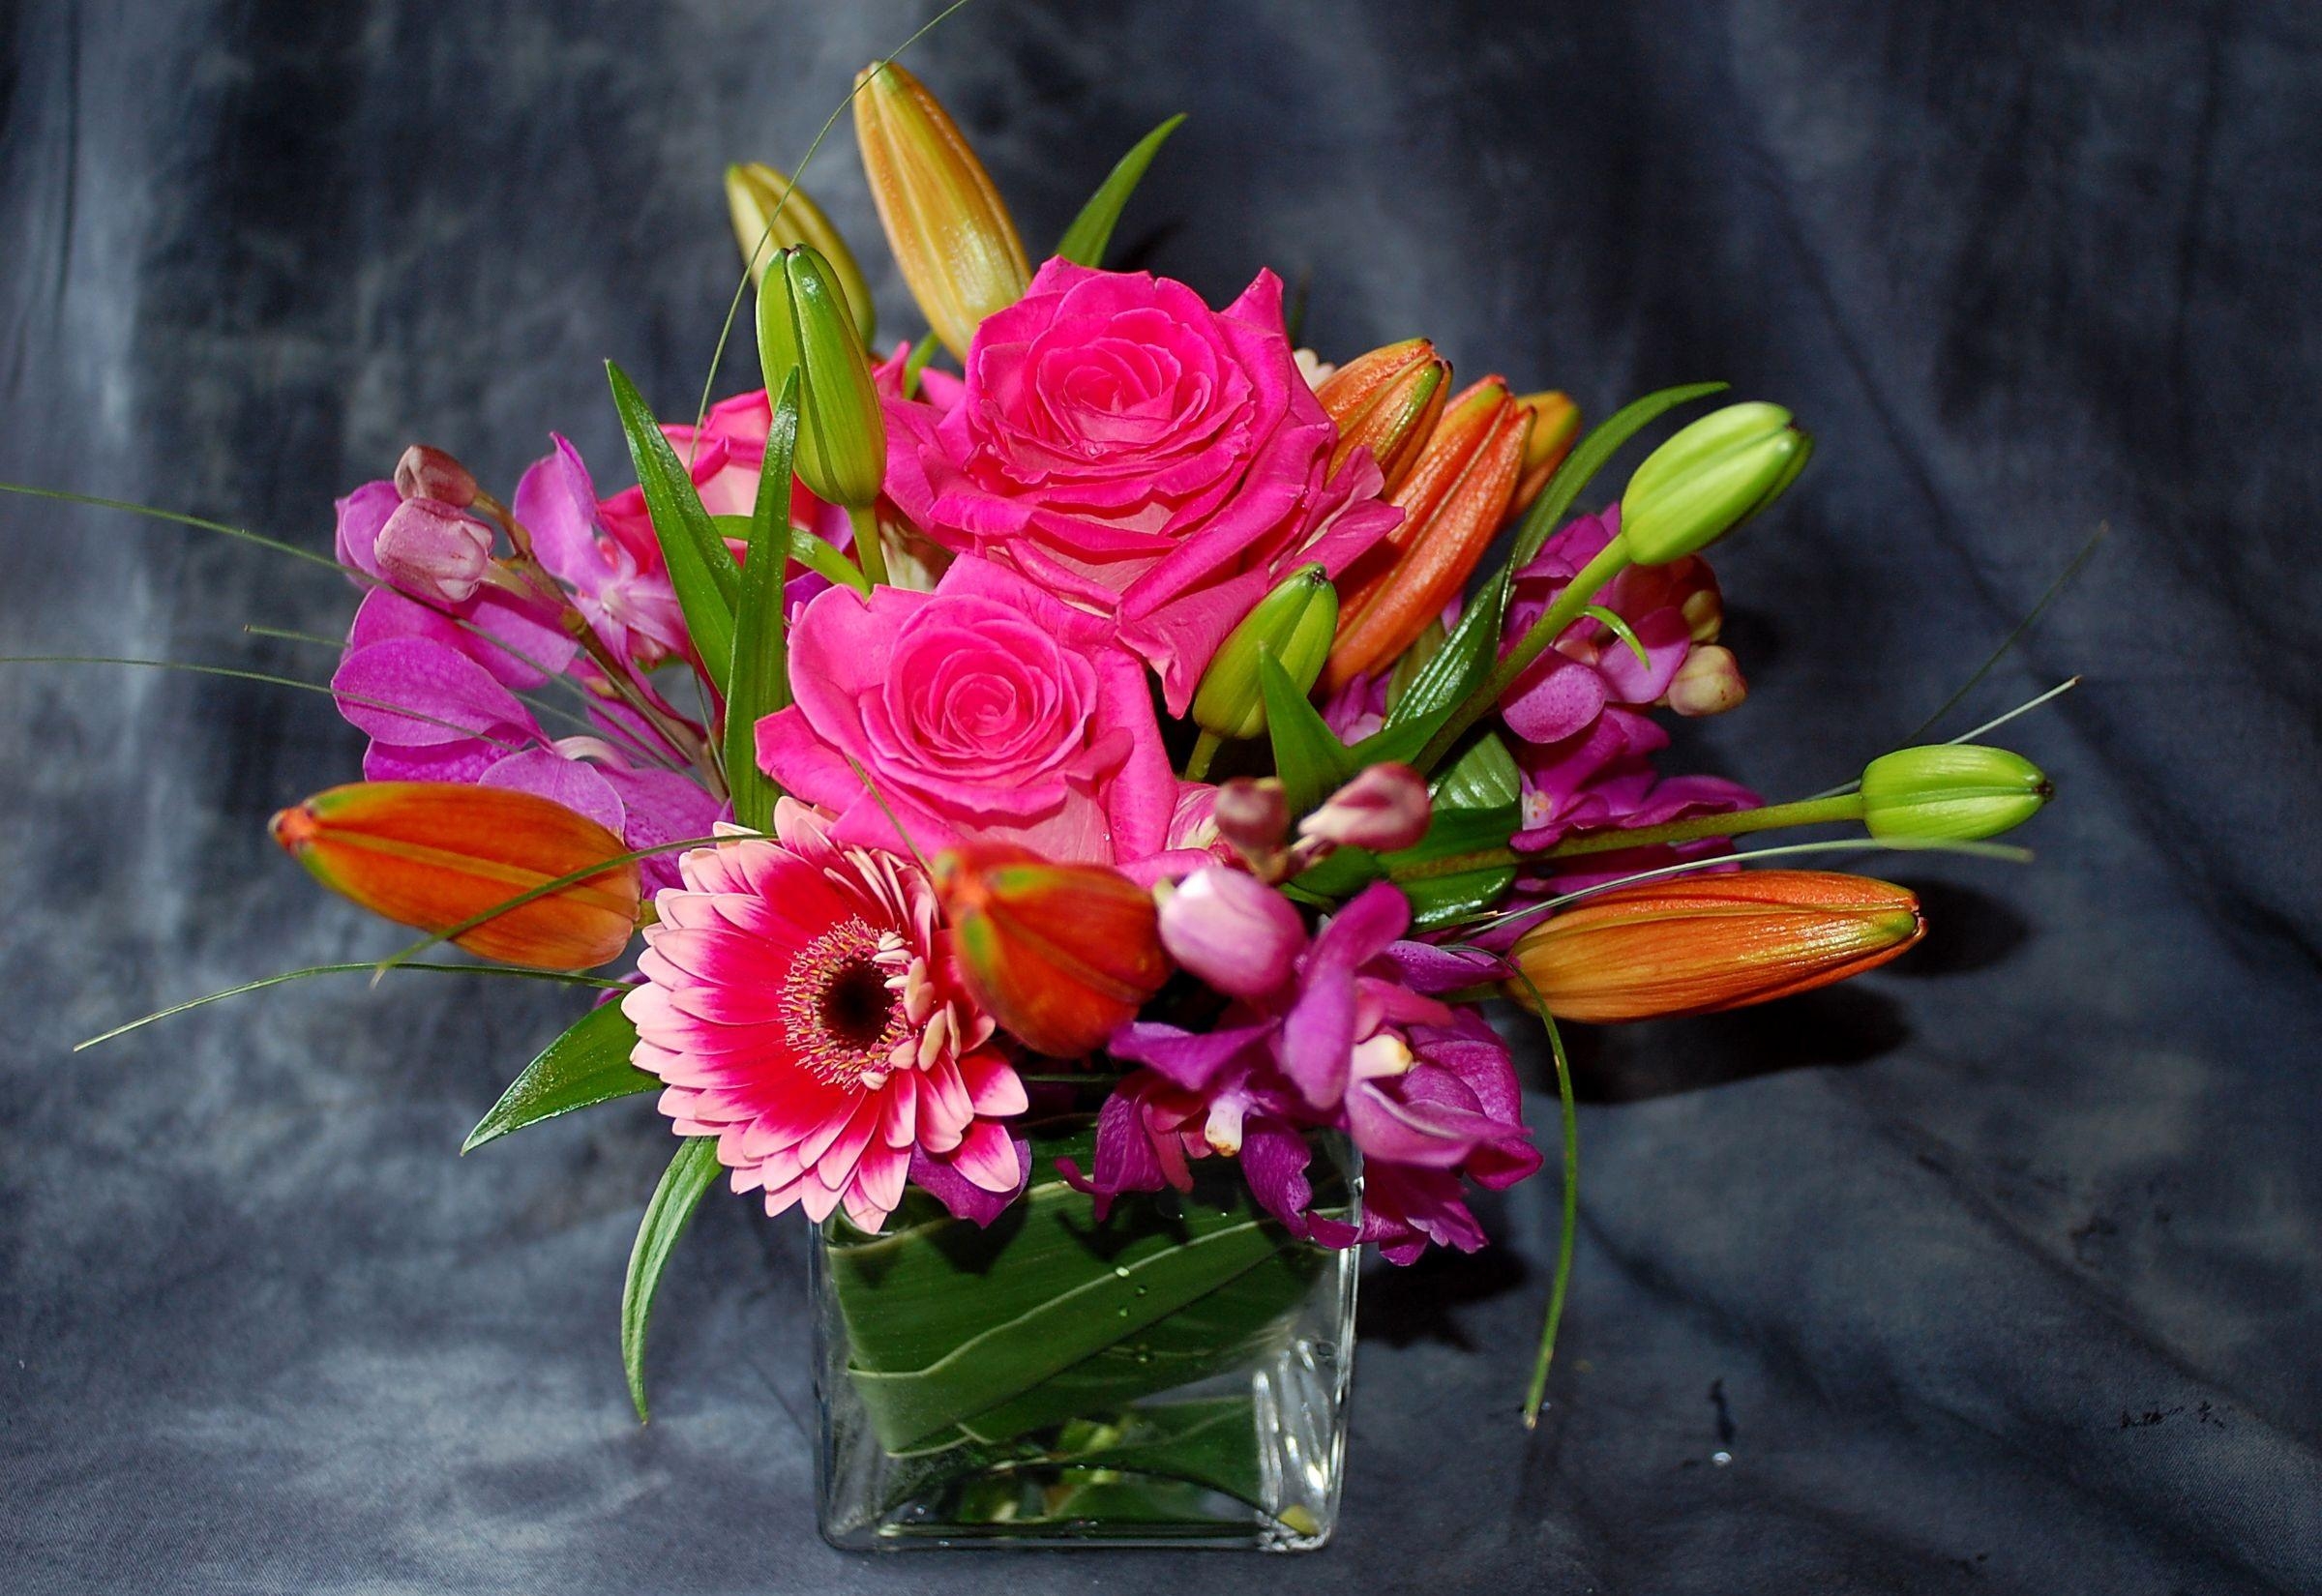 roses, orchids, flowers, gerberas, buds, composition